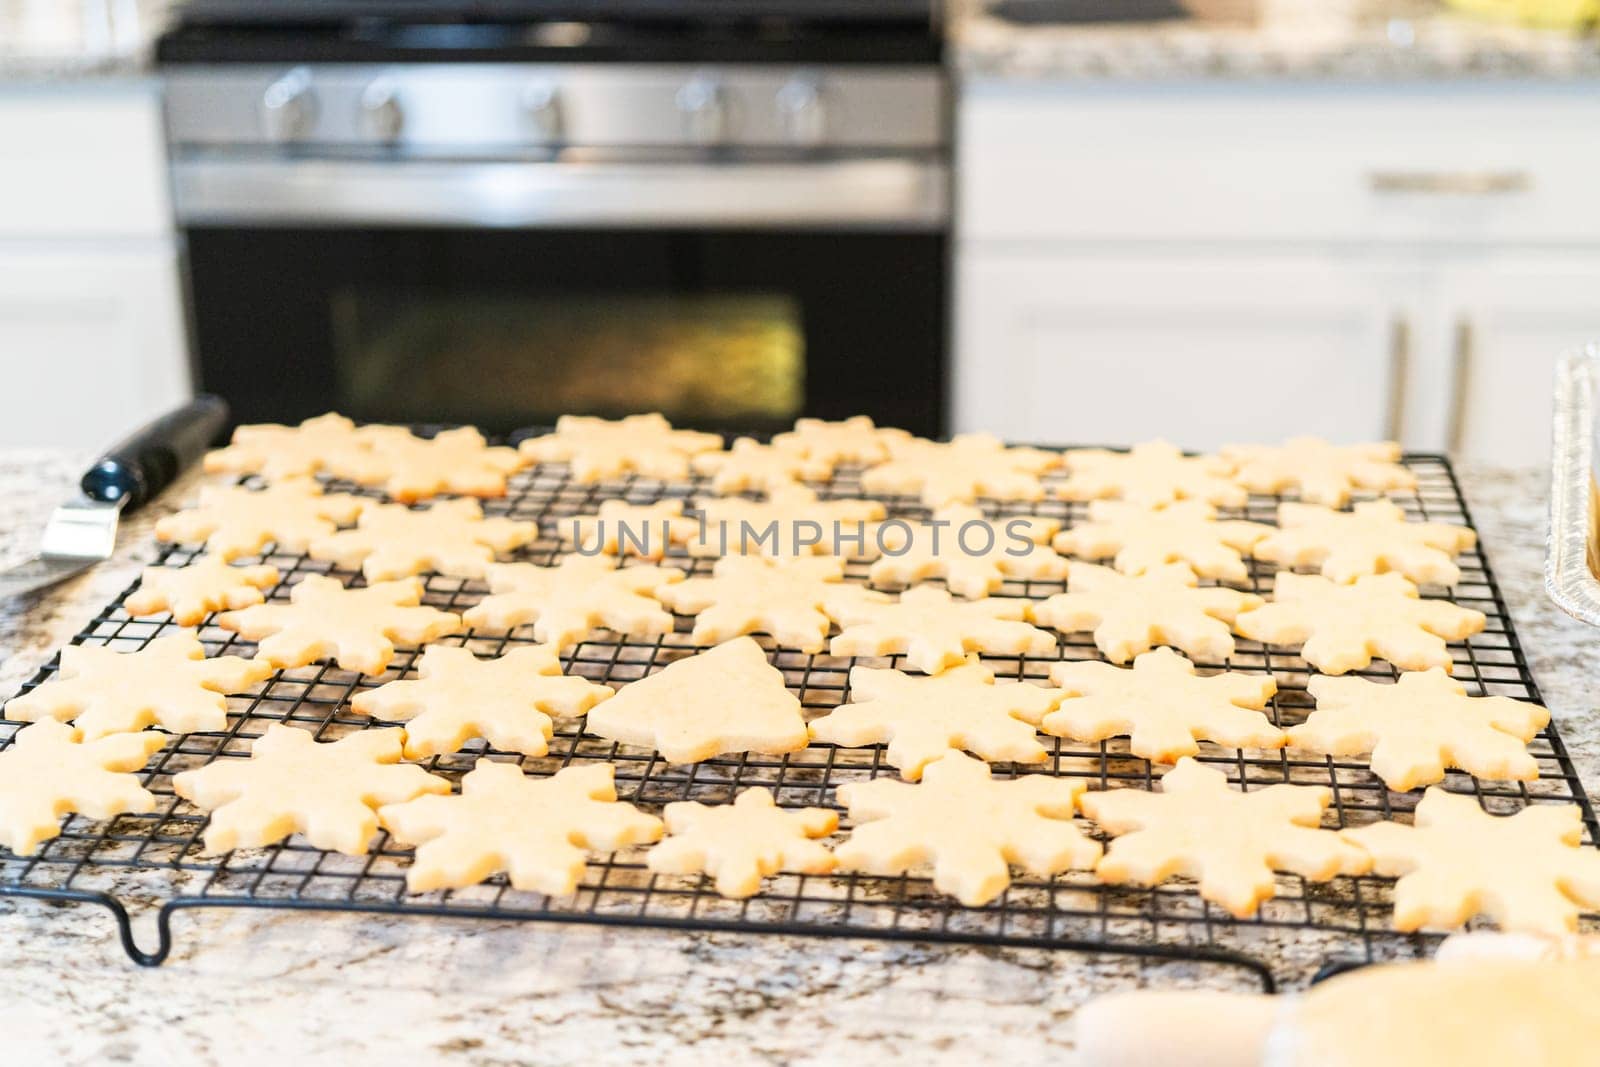 Letting delightful snowflake-shaped sugar cookies cool on a rack, preparing them for festive Christmas gifts.